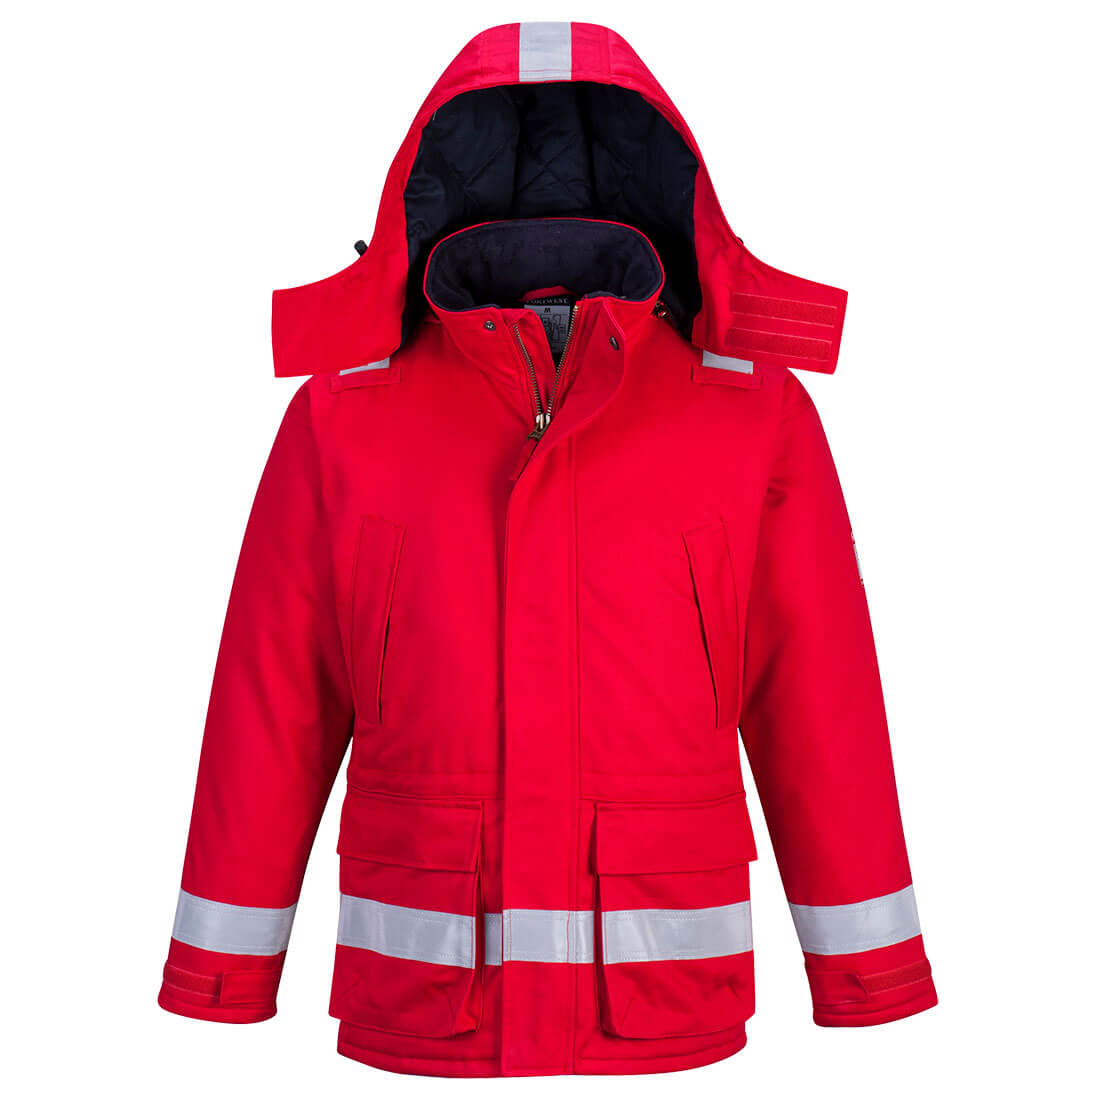 Image of Biz Flame Mens Flame Resistant Antistatic Winter Jacket Red 3XL